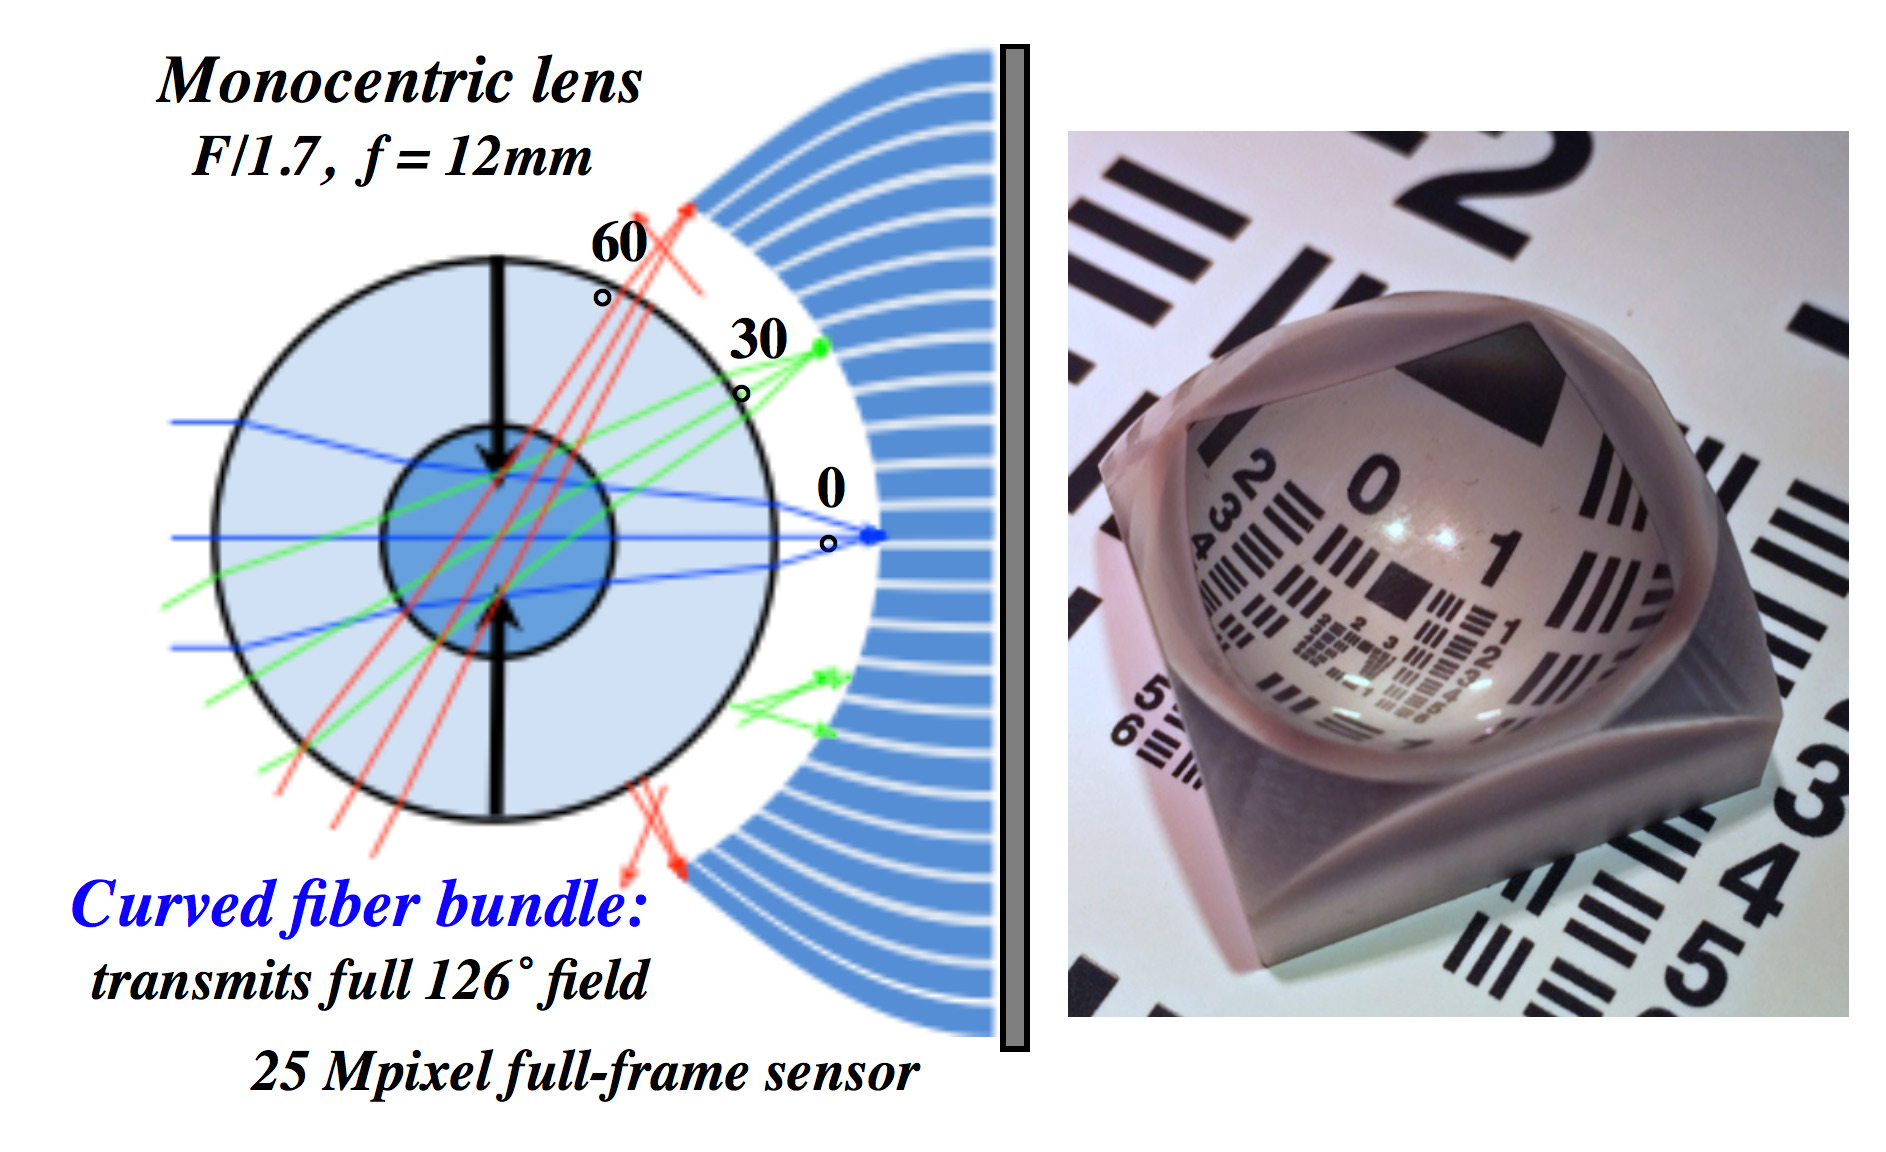 The diagra​m at left shows how light travels through the spherical (monocentric) lens then focuses on the inner surface of the fiber-optic bundle. The image at right shows the fiber-optic bundle itself, about an inch on edge.